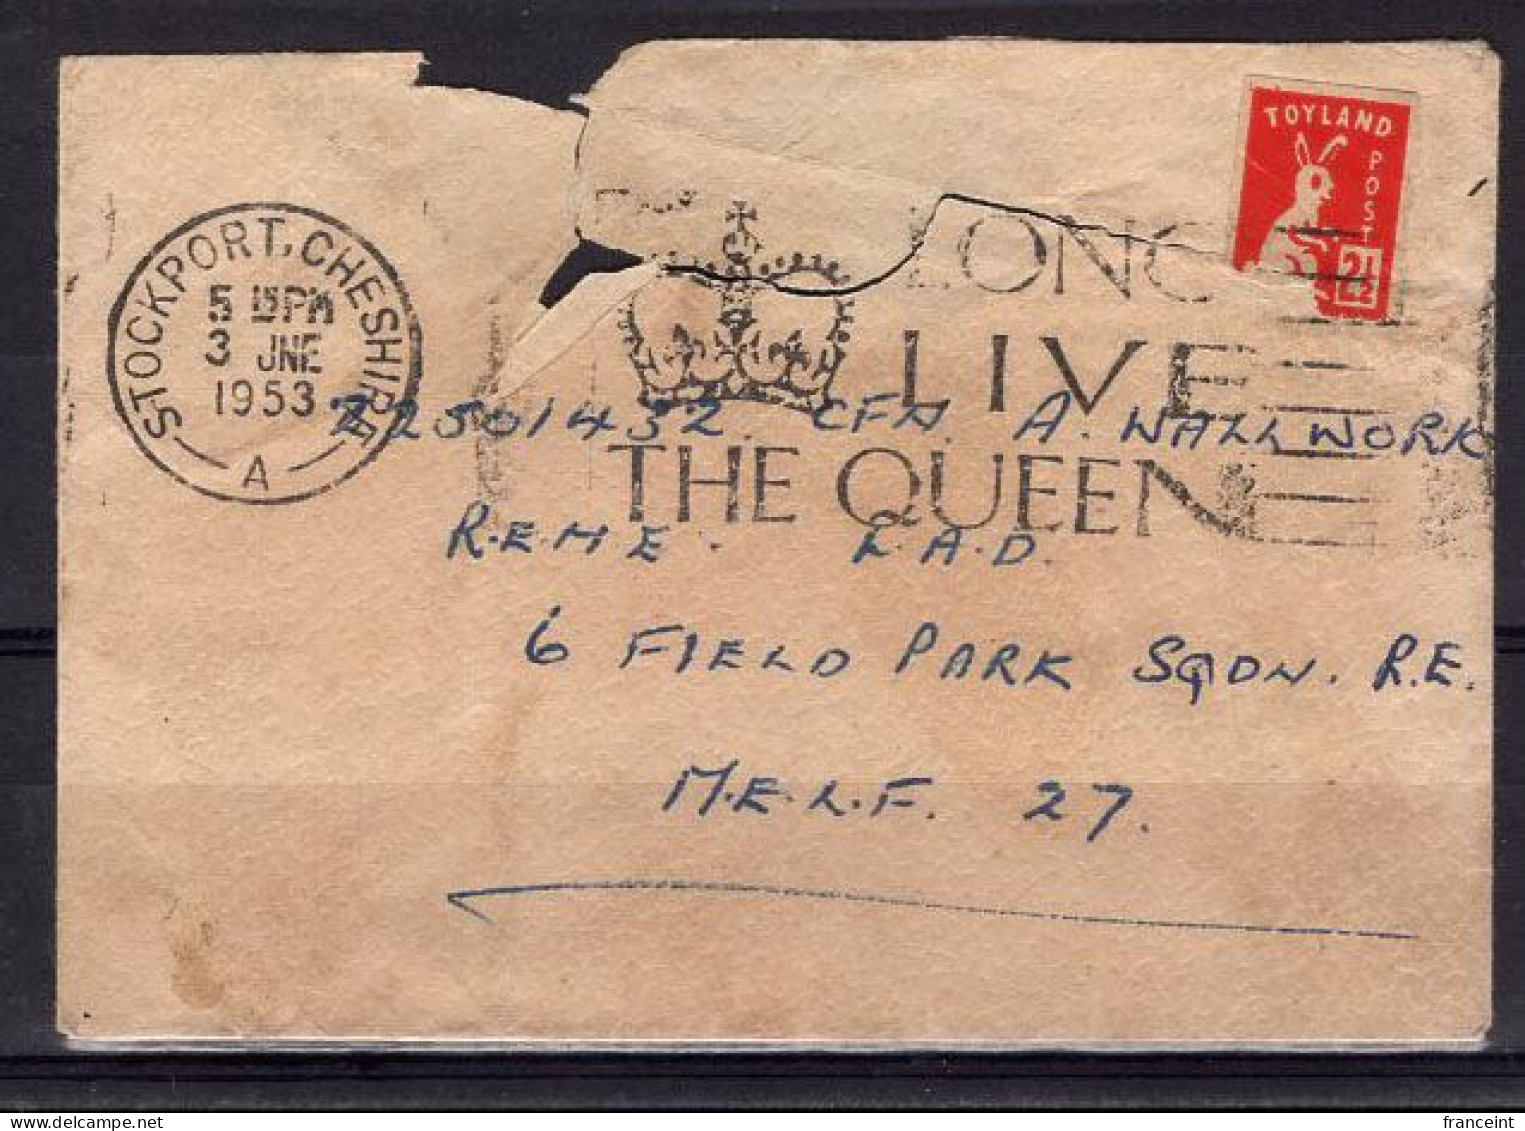 GREAT BRITAIN(1953) Rabbit. Miniature Envelope Franked With (damaged) 2-1/2 TOYLAND POST Stamp Showing Picture Of A Baby - Cinderellas